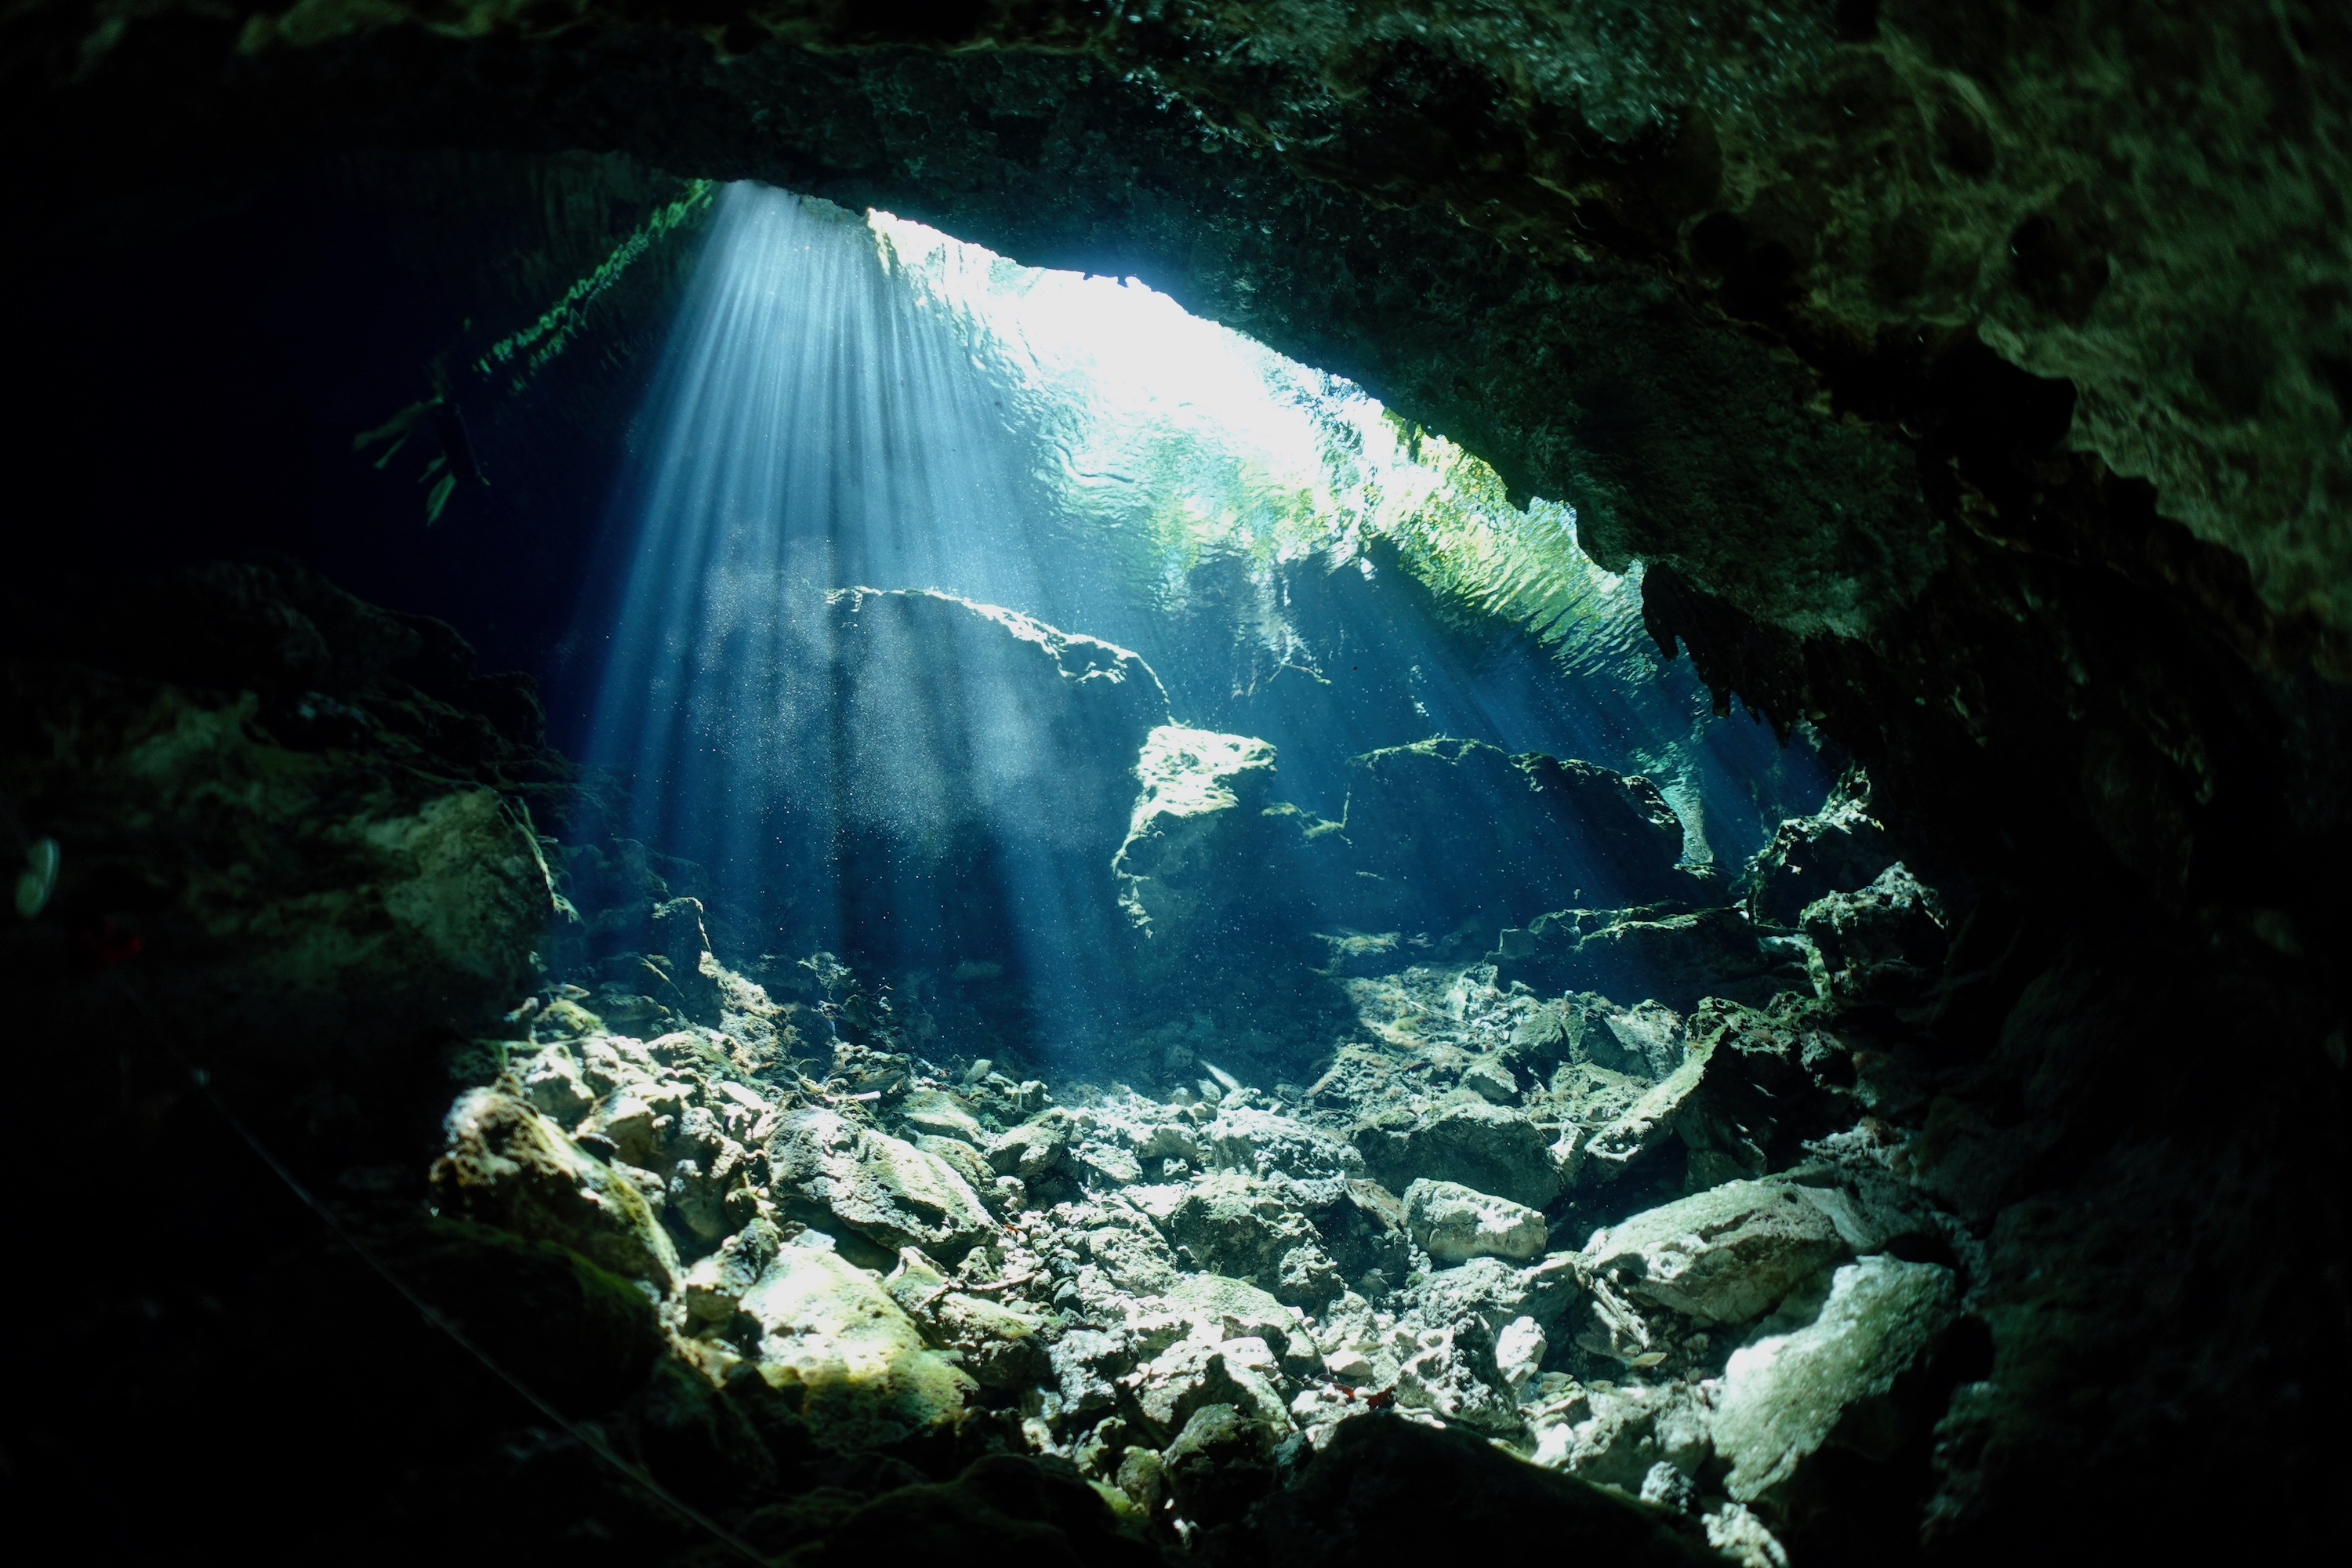 Light beams in Cenote Minotauro. Photo by Pierre Constant